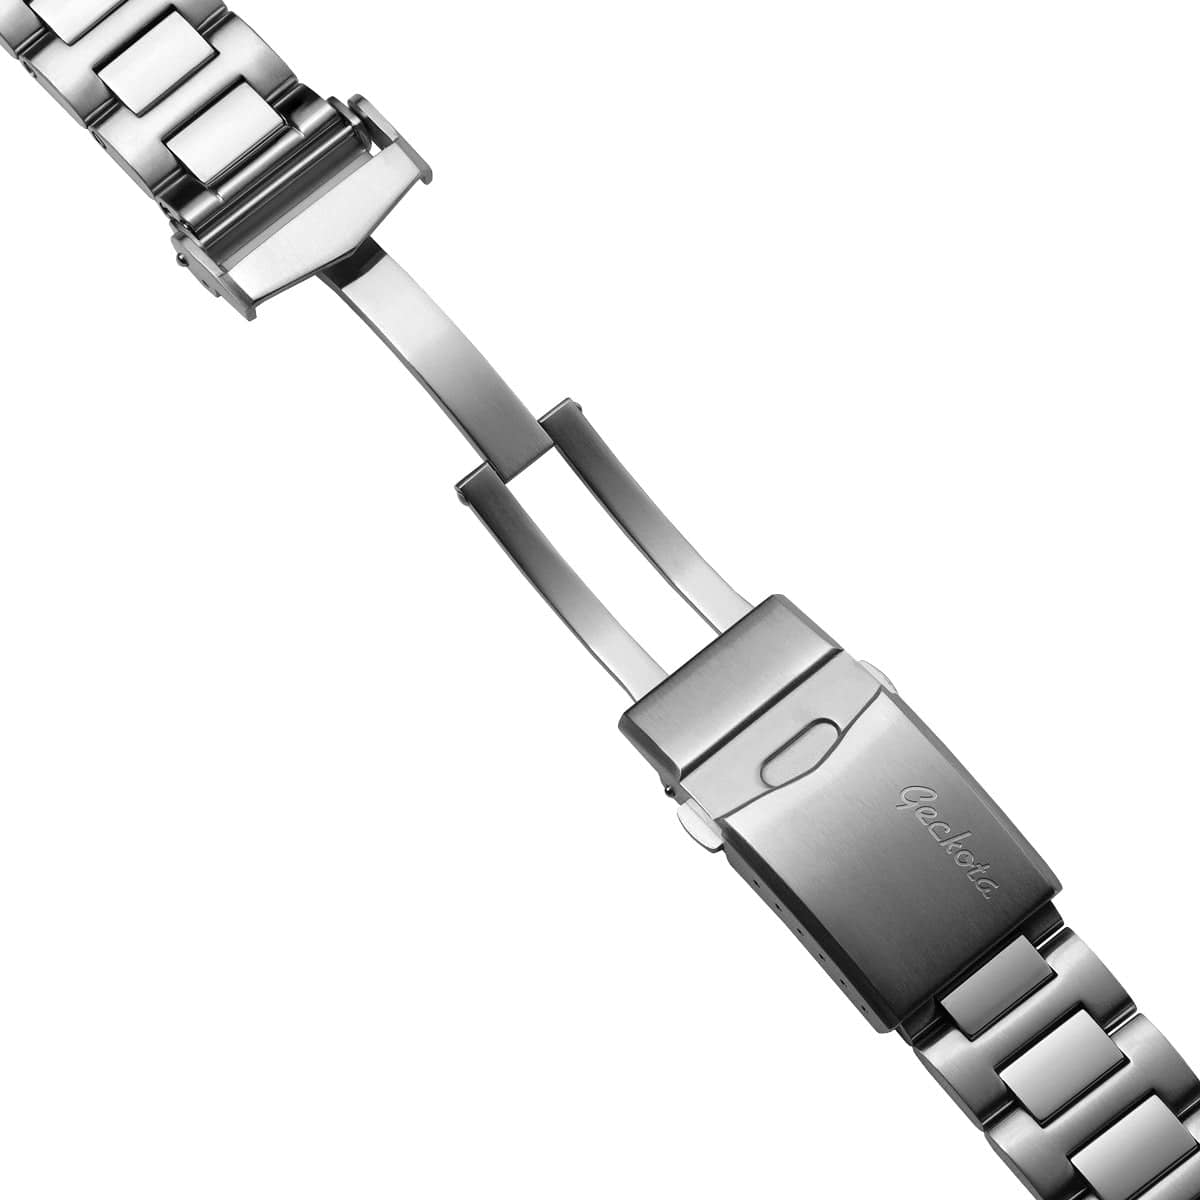 Langstone Solid Stainless Steel Diver's Watch Strap - Brushed and Polished Finish